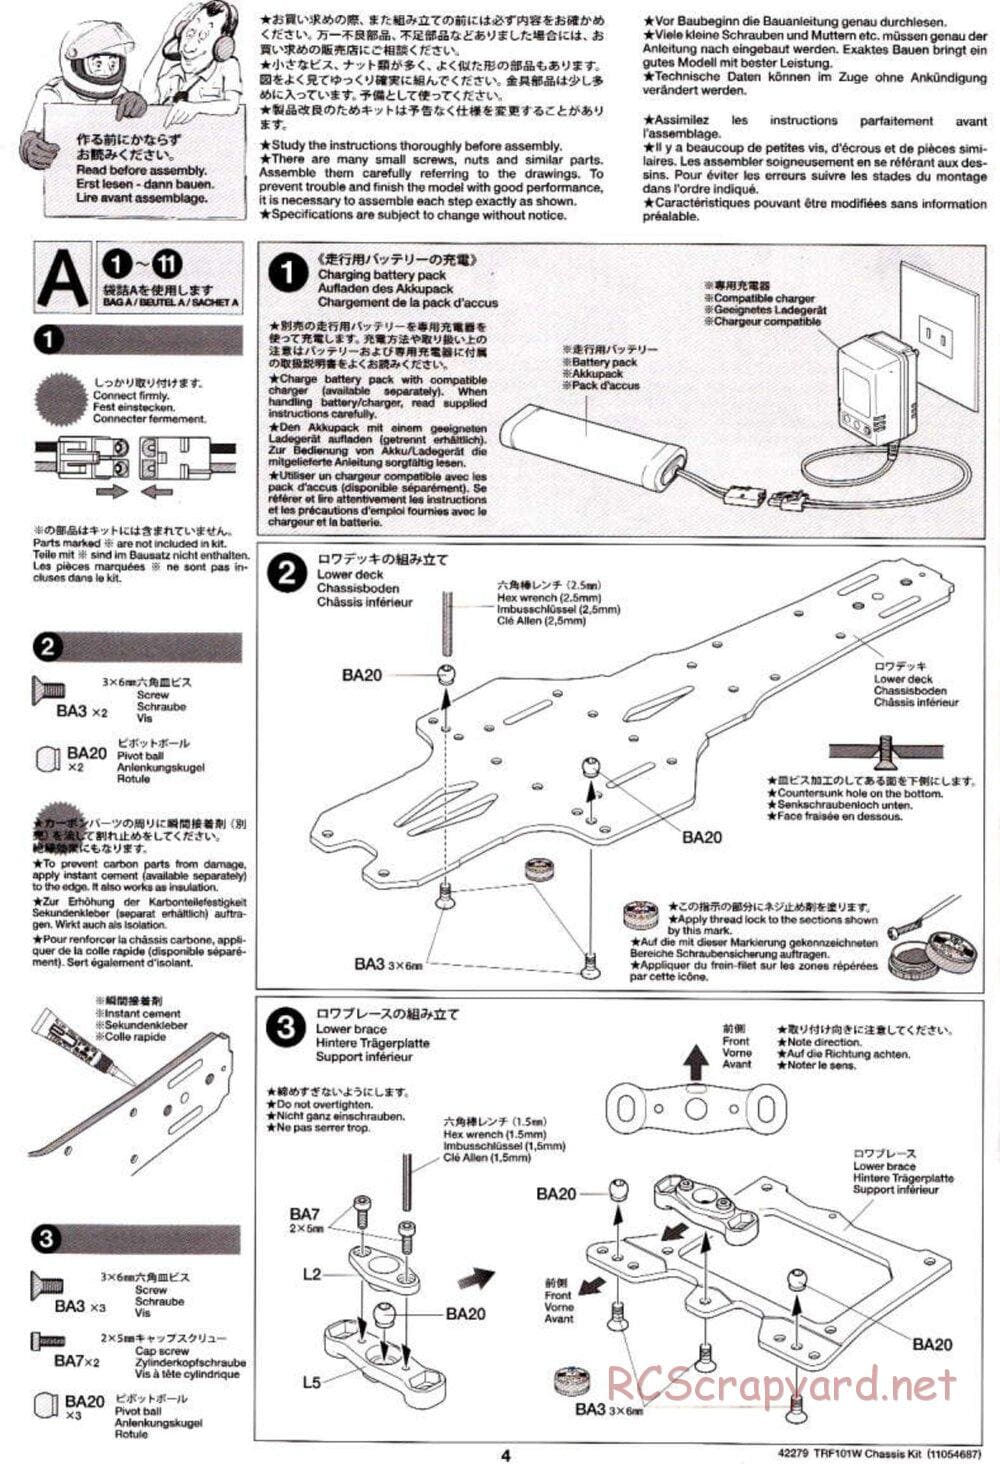 Tamiya - TRF101W Chassis Chassis - Manual - Page 4